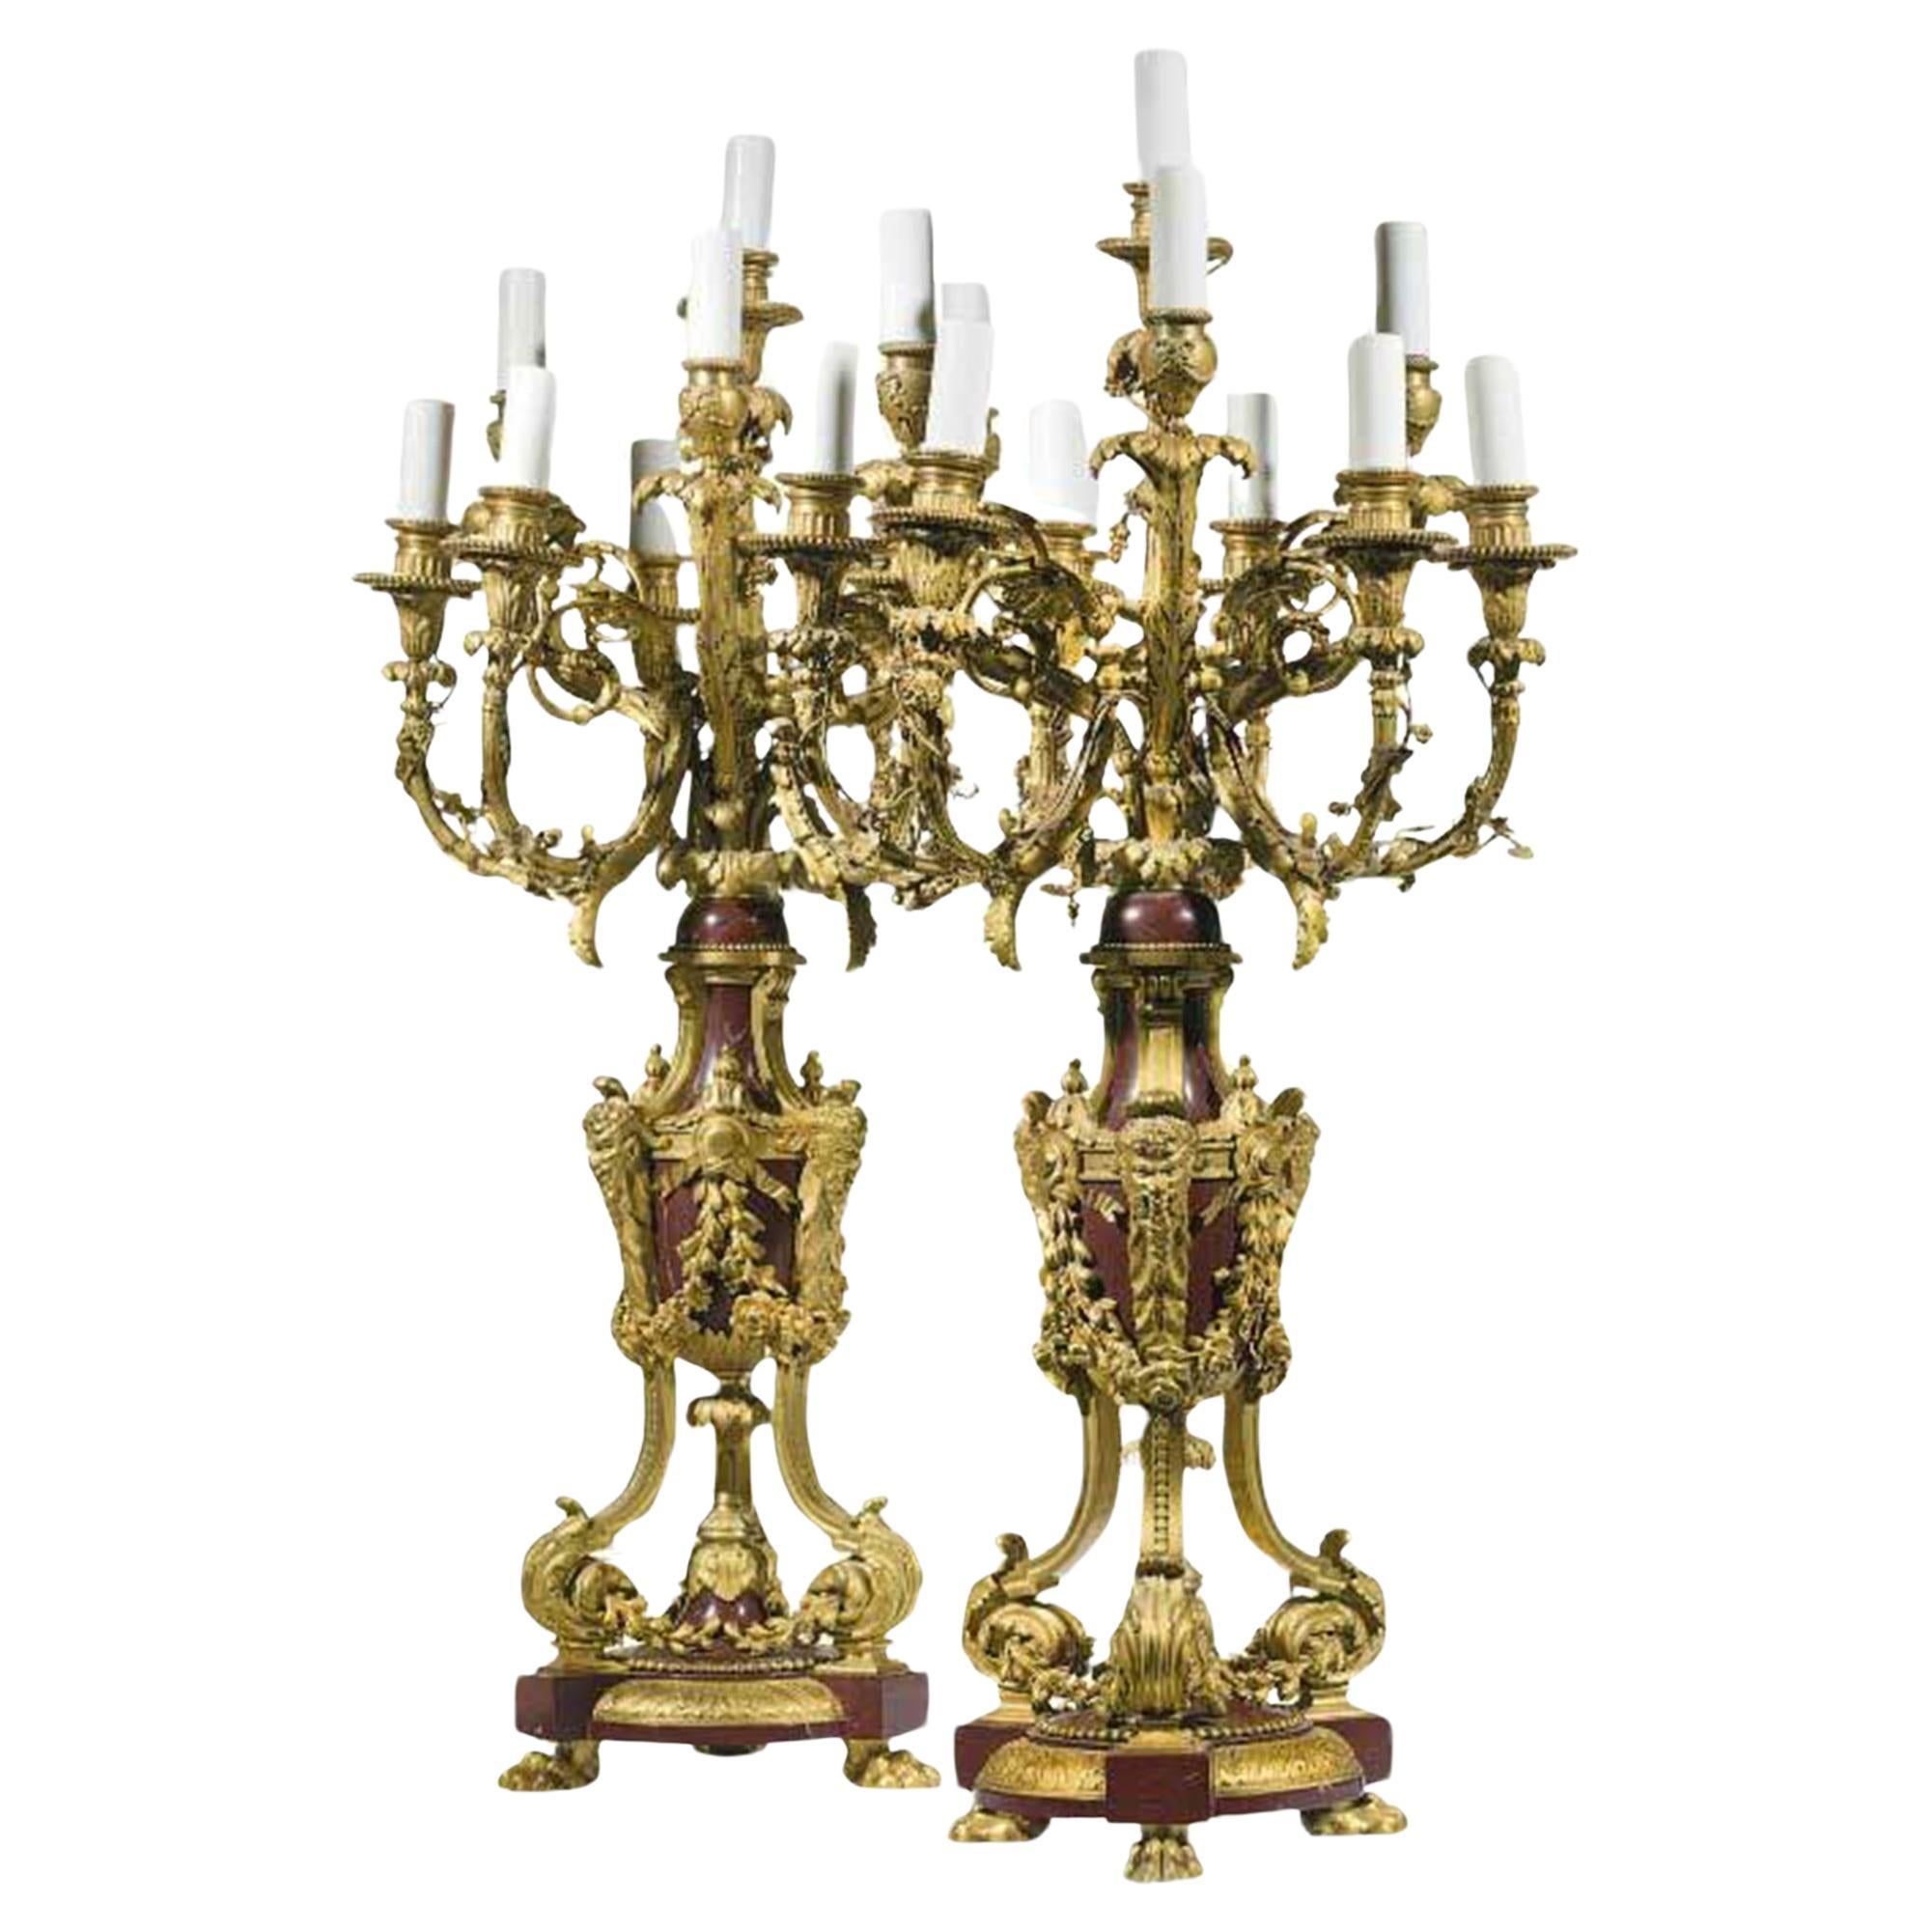 A Pair of Late 19th Century Ormolu and Rouge Marble Ten-Light Candelabras For Sale